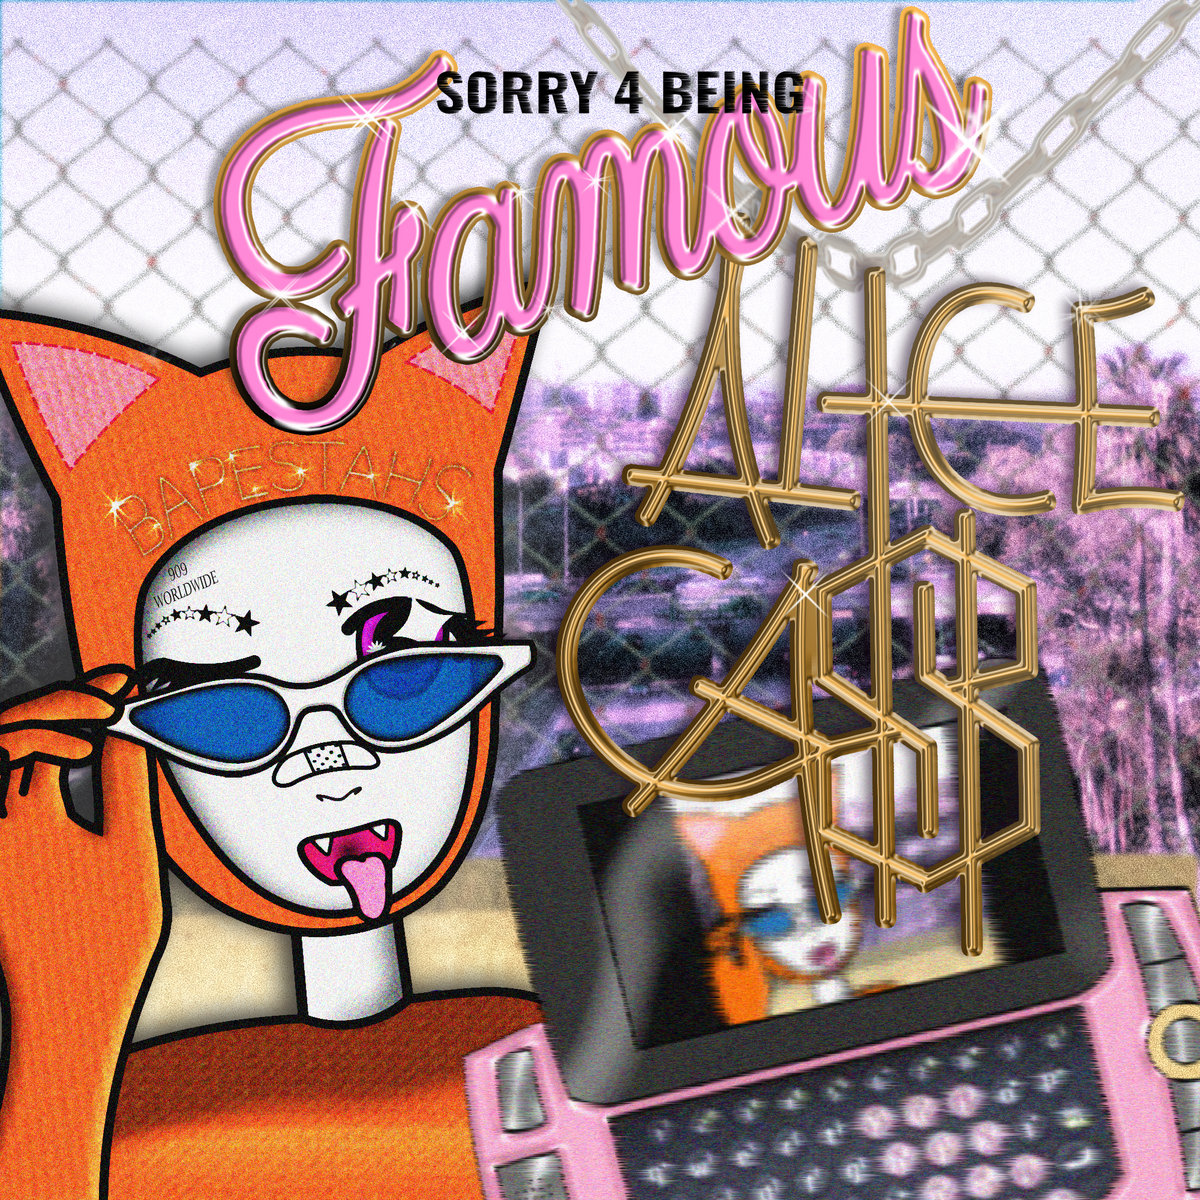 THE ALBUM COVER OF SORRY FOR BEING FAMOUS BY ALICE GAS.